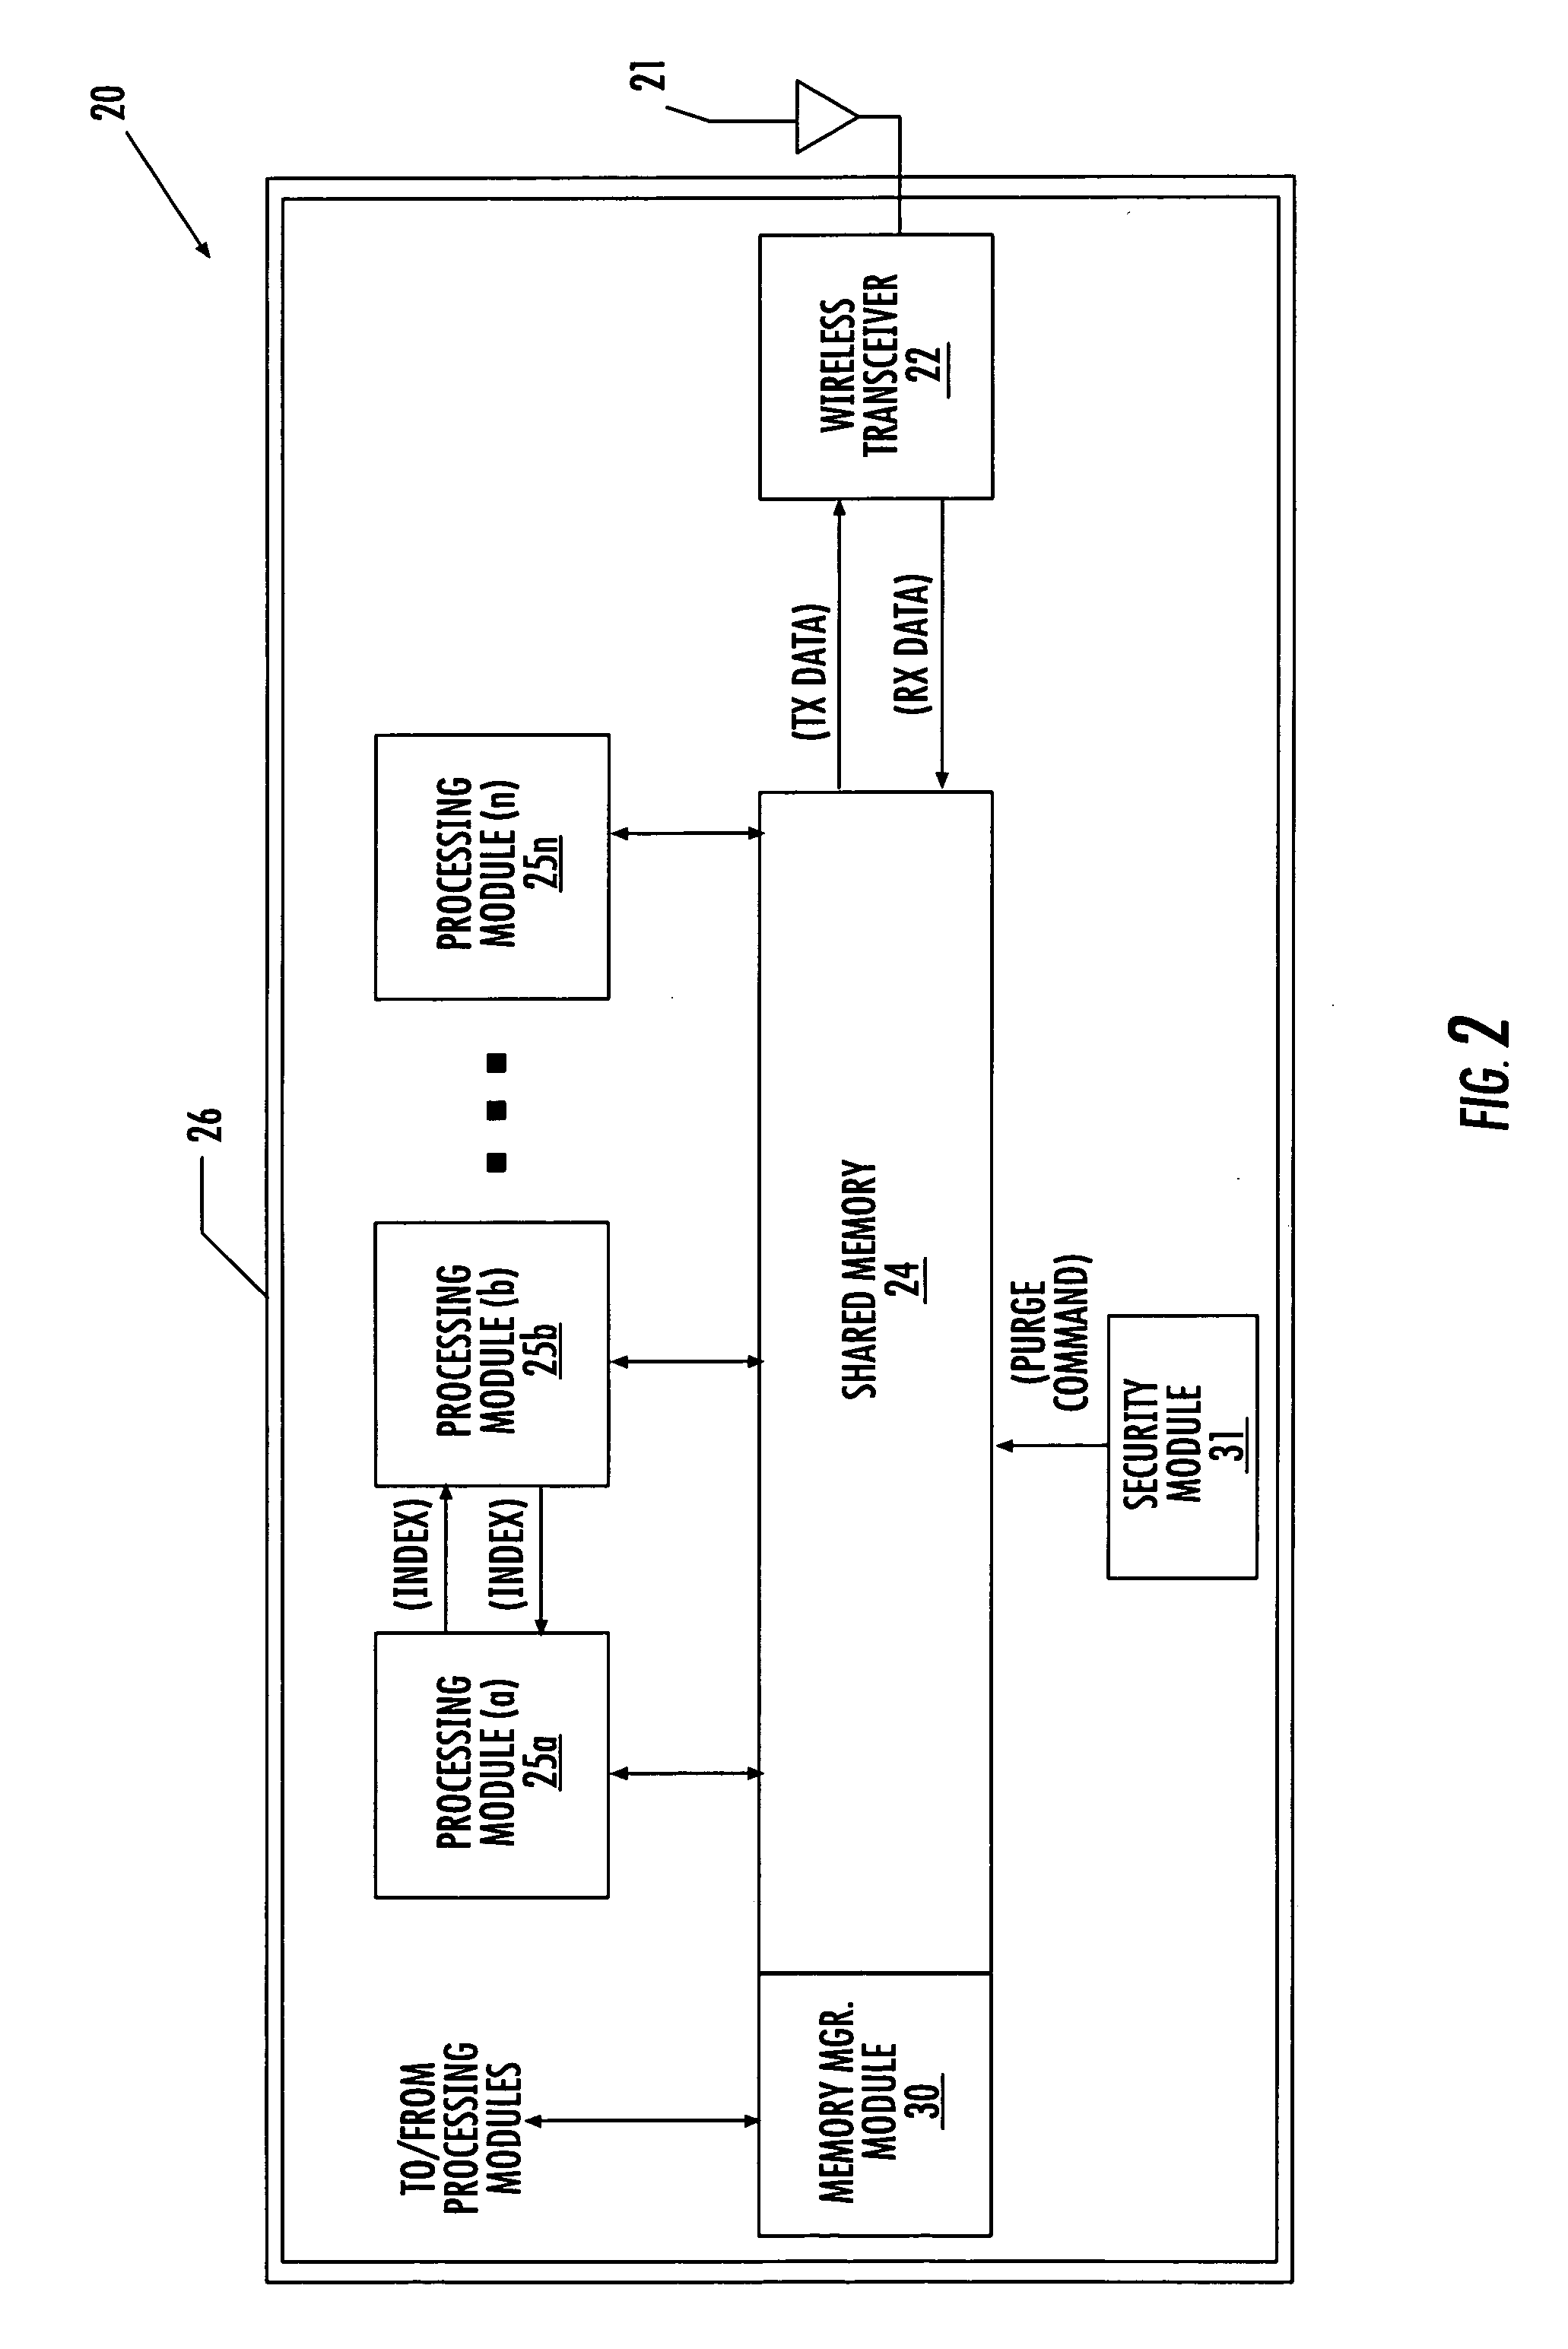 Mobile wireless communications device providing data management and security features and related methods